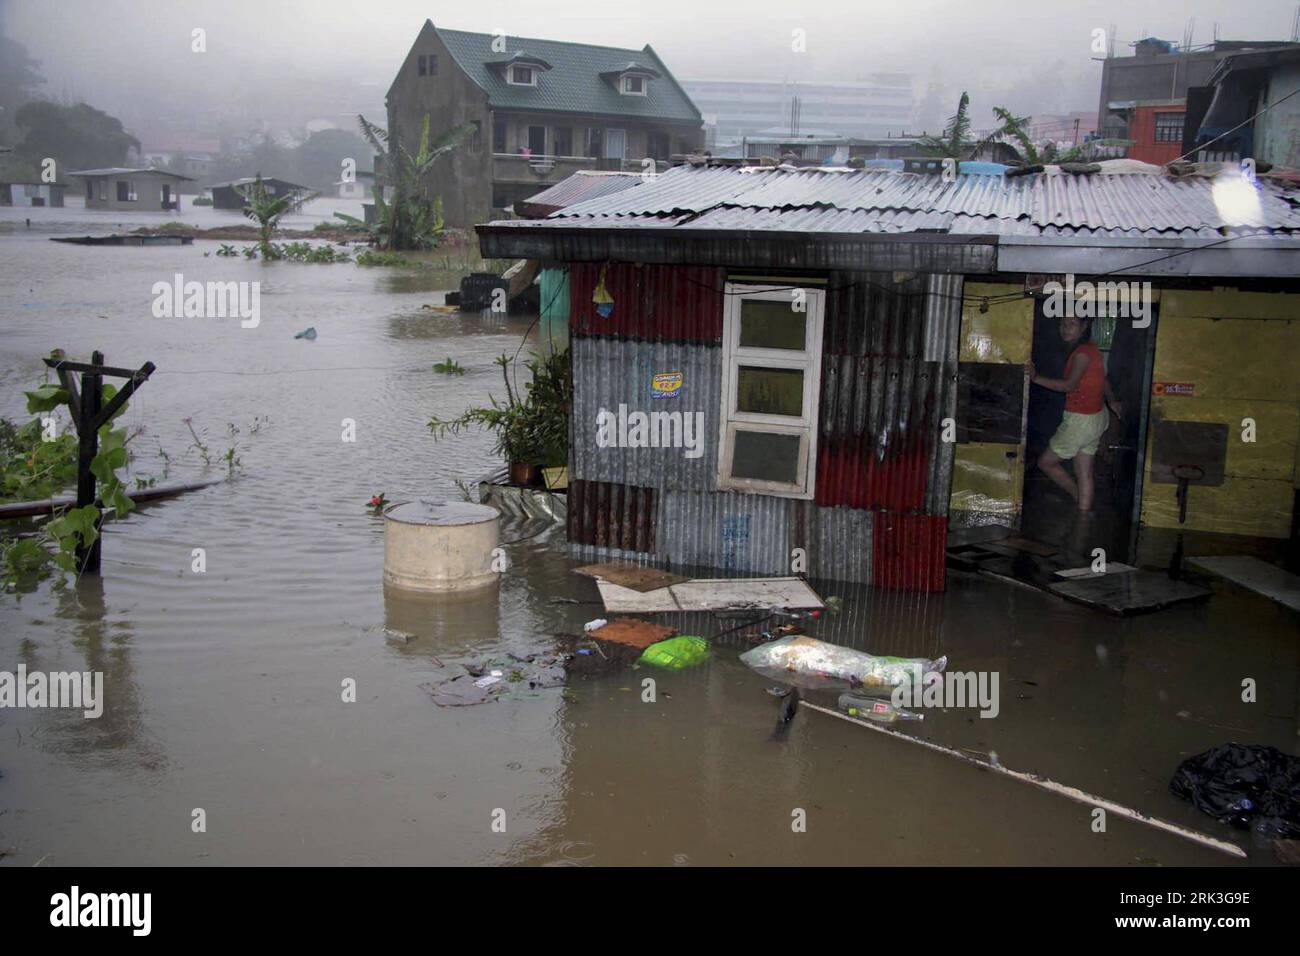 Bildnummer: 53506497  Datum: 05.10.2009  Copyright: imago/Xinhua (091005) -- MANILA, Oct. 5, 2009 (Xinhua) -- Houses are seen in water after they were damaged by strong rains and mudslides in Baguio, the Philippines, on Oct. 5, 2009. At least 16were killed, mostly buried in landslides, as Typhoon Parma swept through the Philippines northern coast since Oct. 3, leaving trees uprooted, power pylons toppled and houses damaged. (Xinhua/Dave Leprozo) (lr) (2)THE PHILIPPINES-TYPHOON PARMA-AFTERMATH PUBLICATIONxNOTxINxCHN Philippinen Taifun Parma Naturtatastophen Flut Überschwemmung kbdig xub 2009 qu Stock Photo